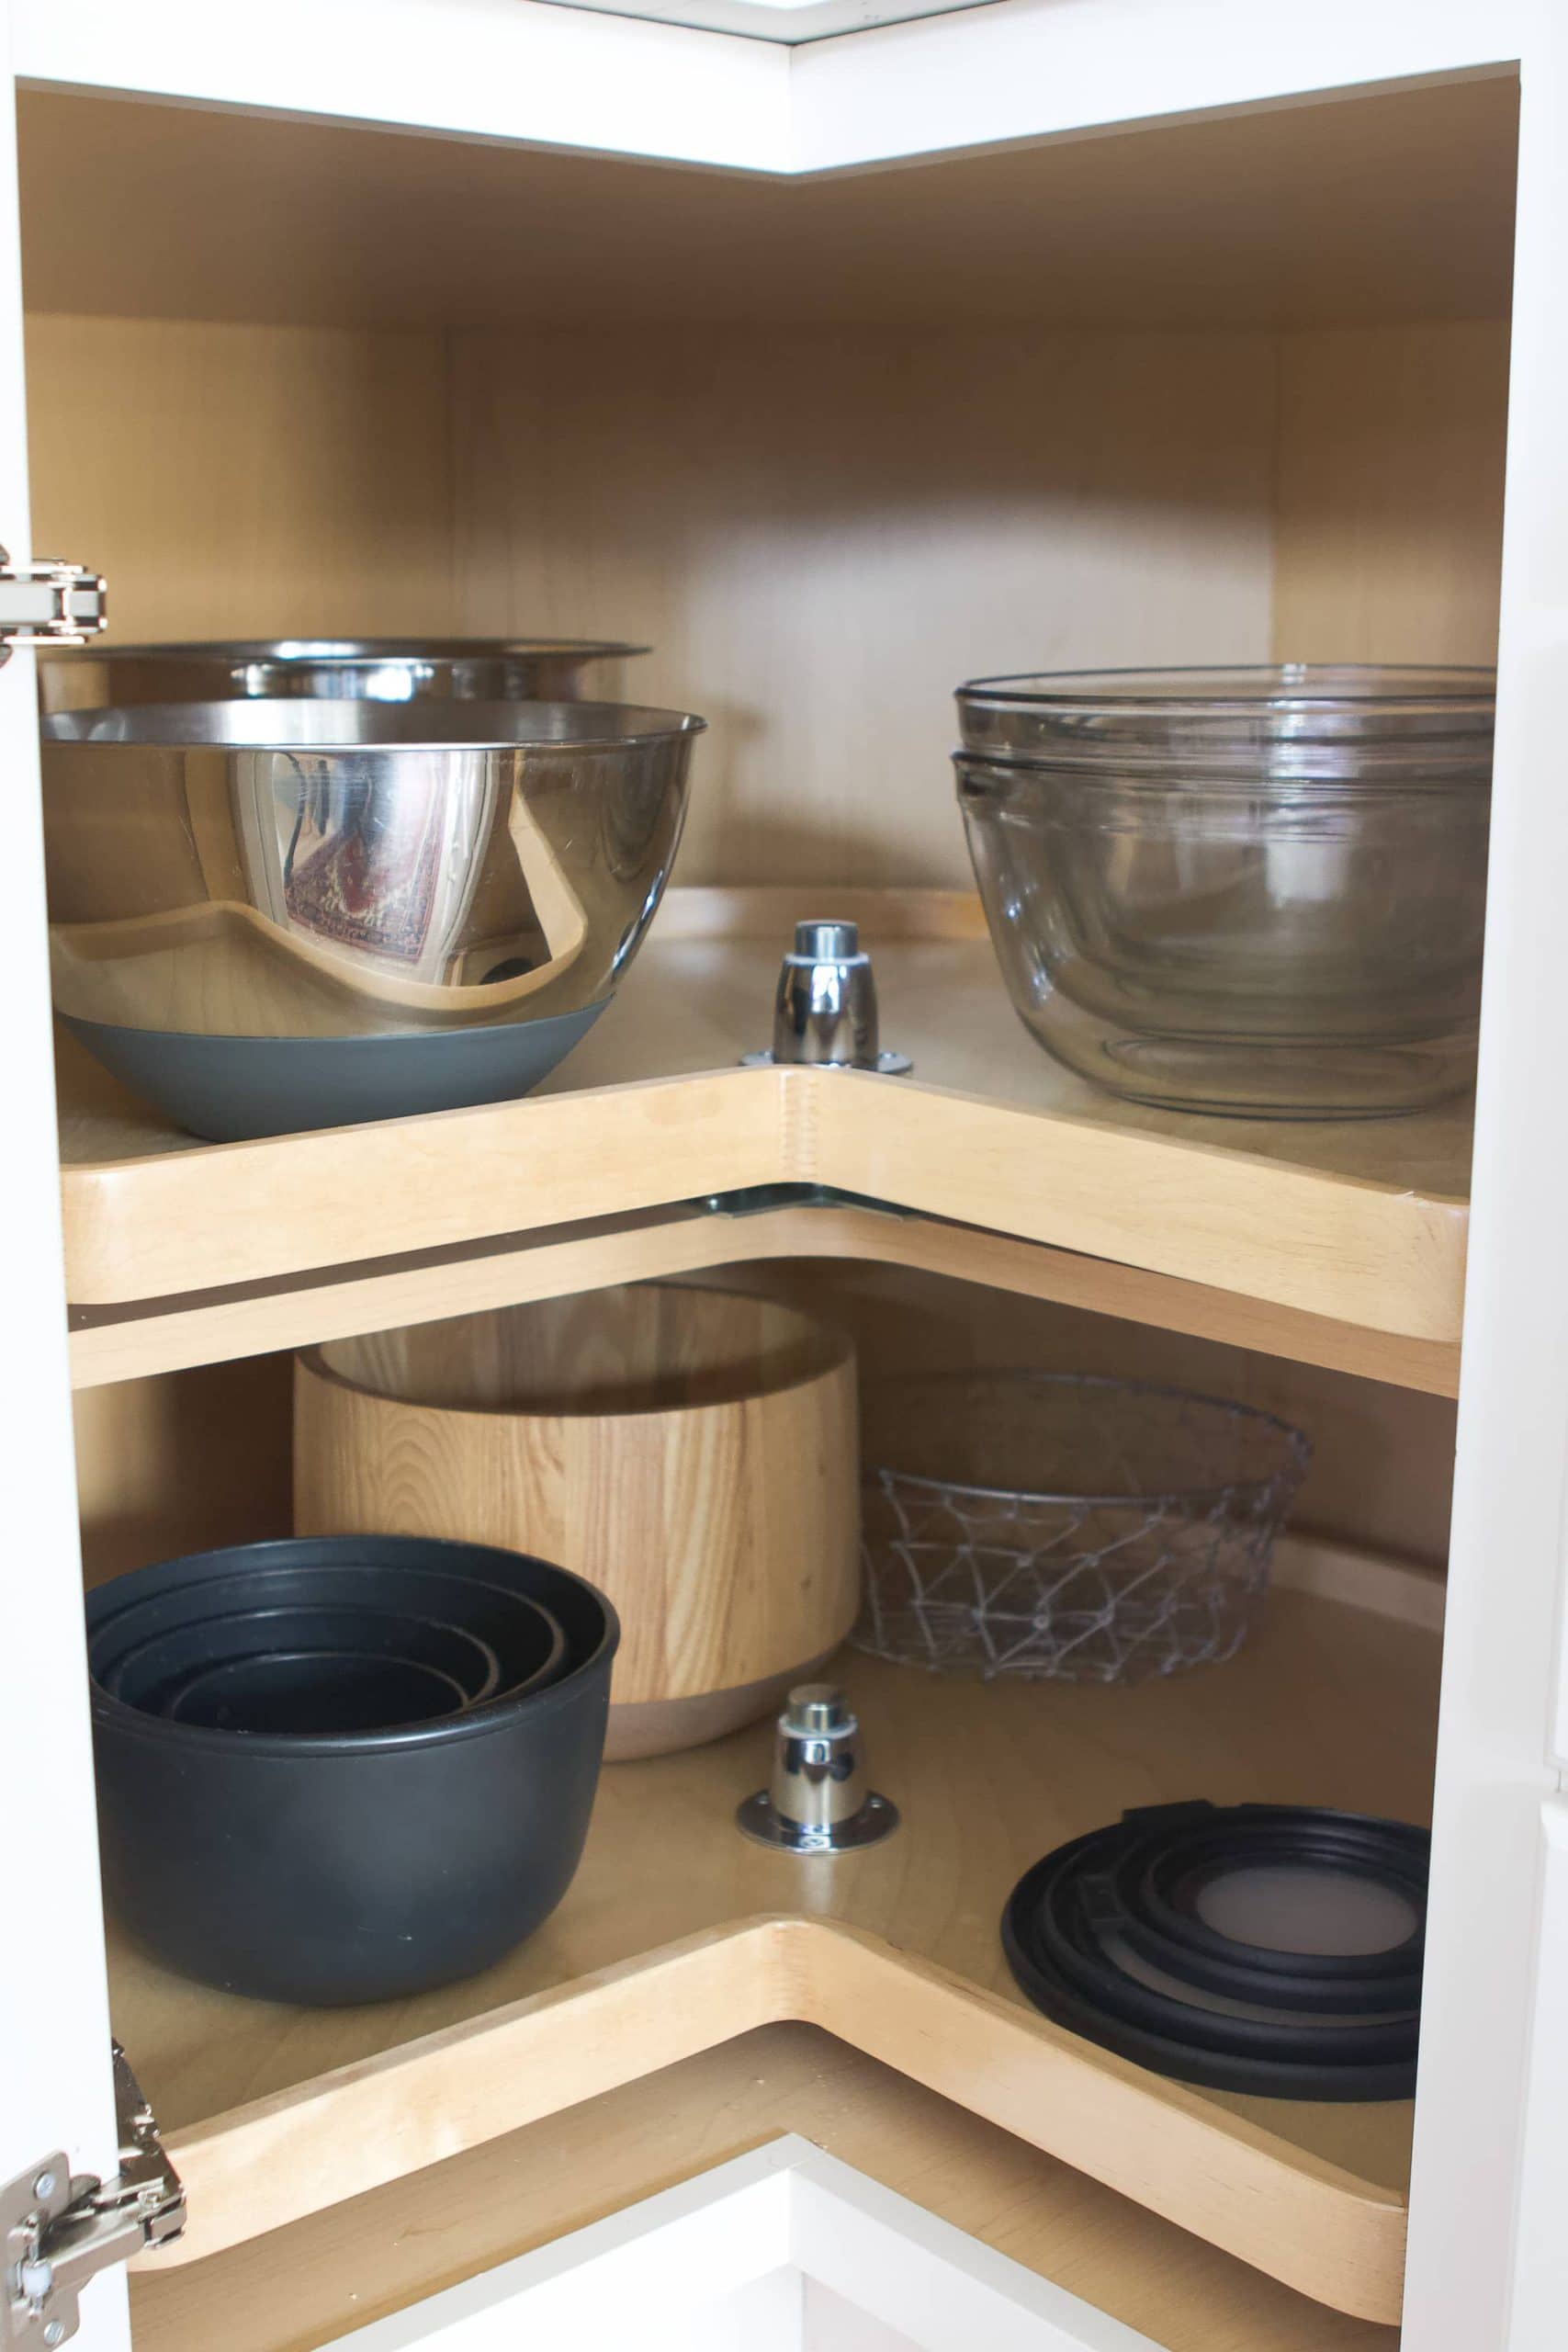 Using a lazy susan in your kitchen